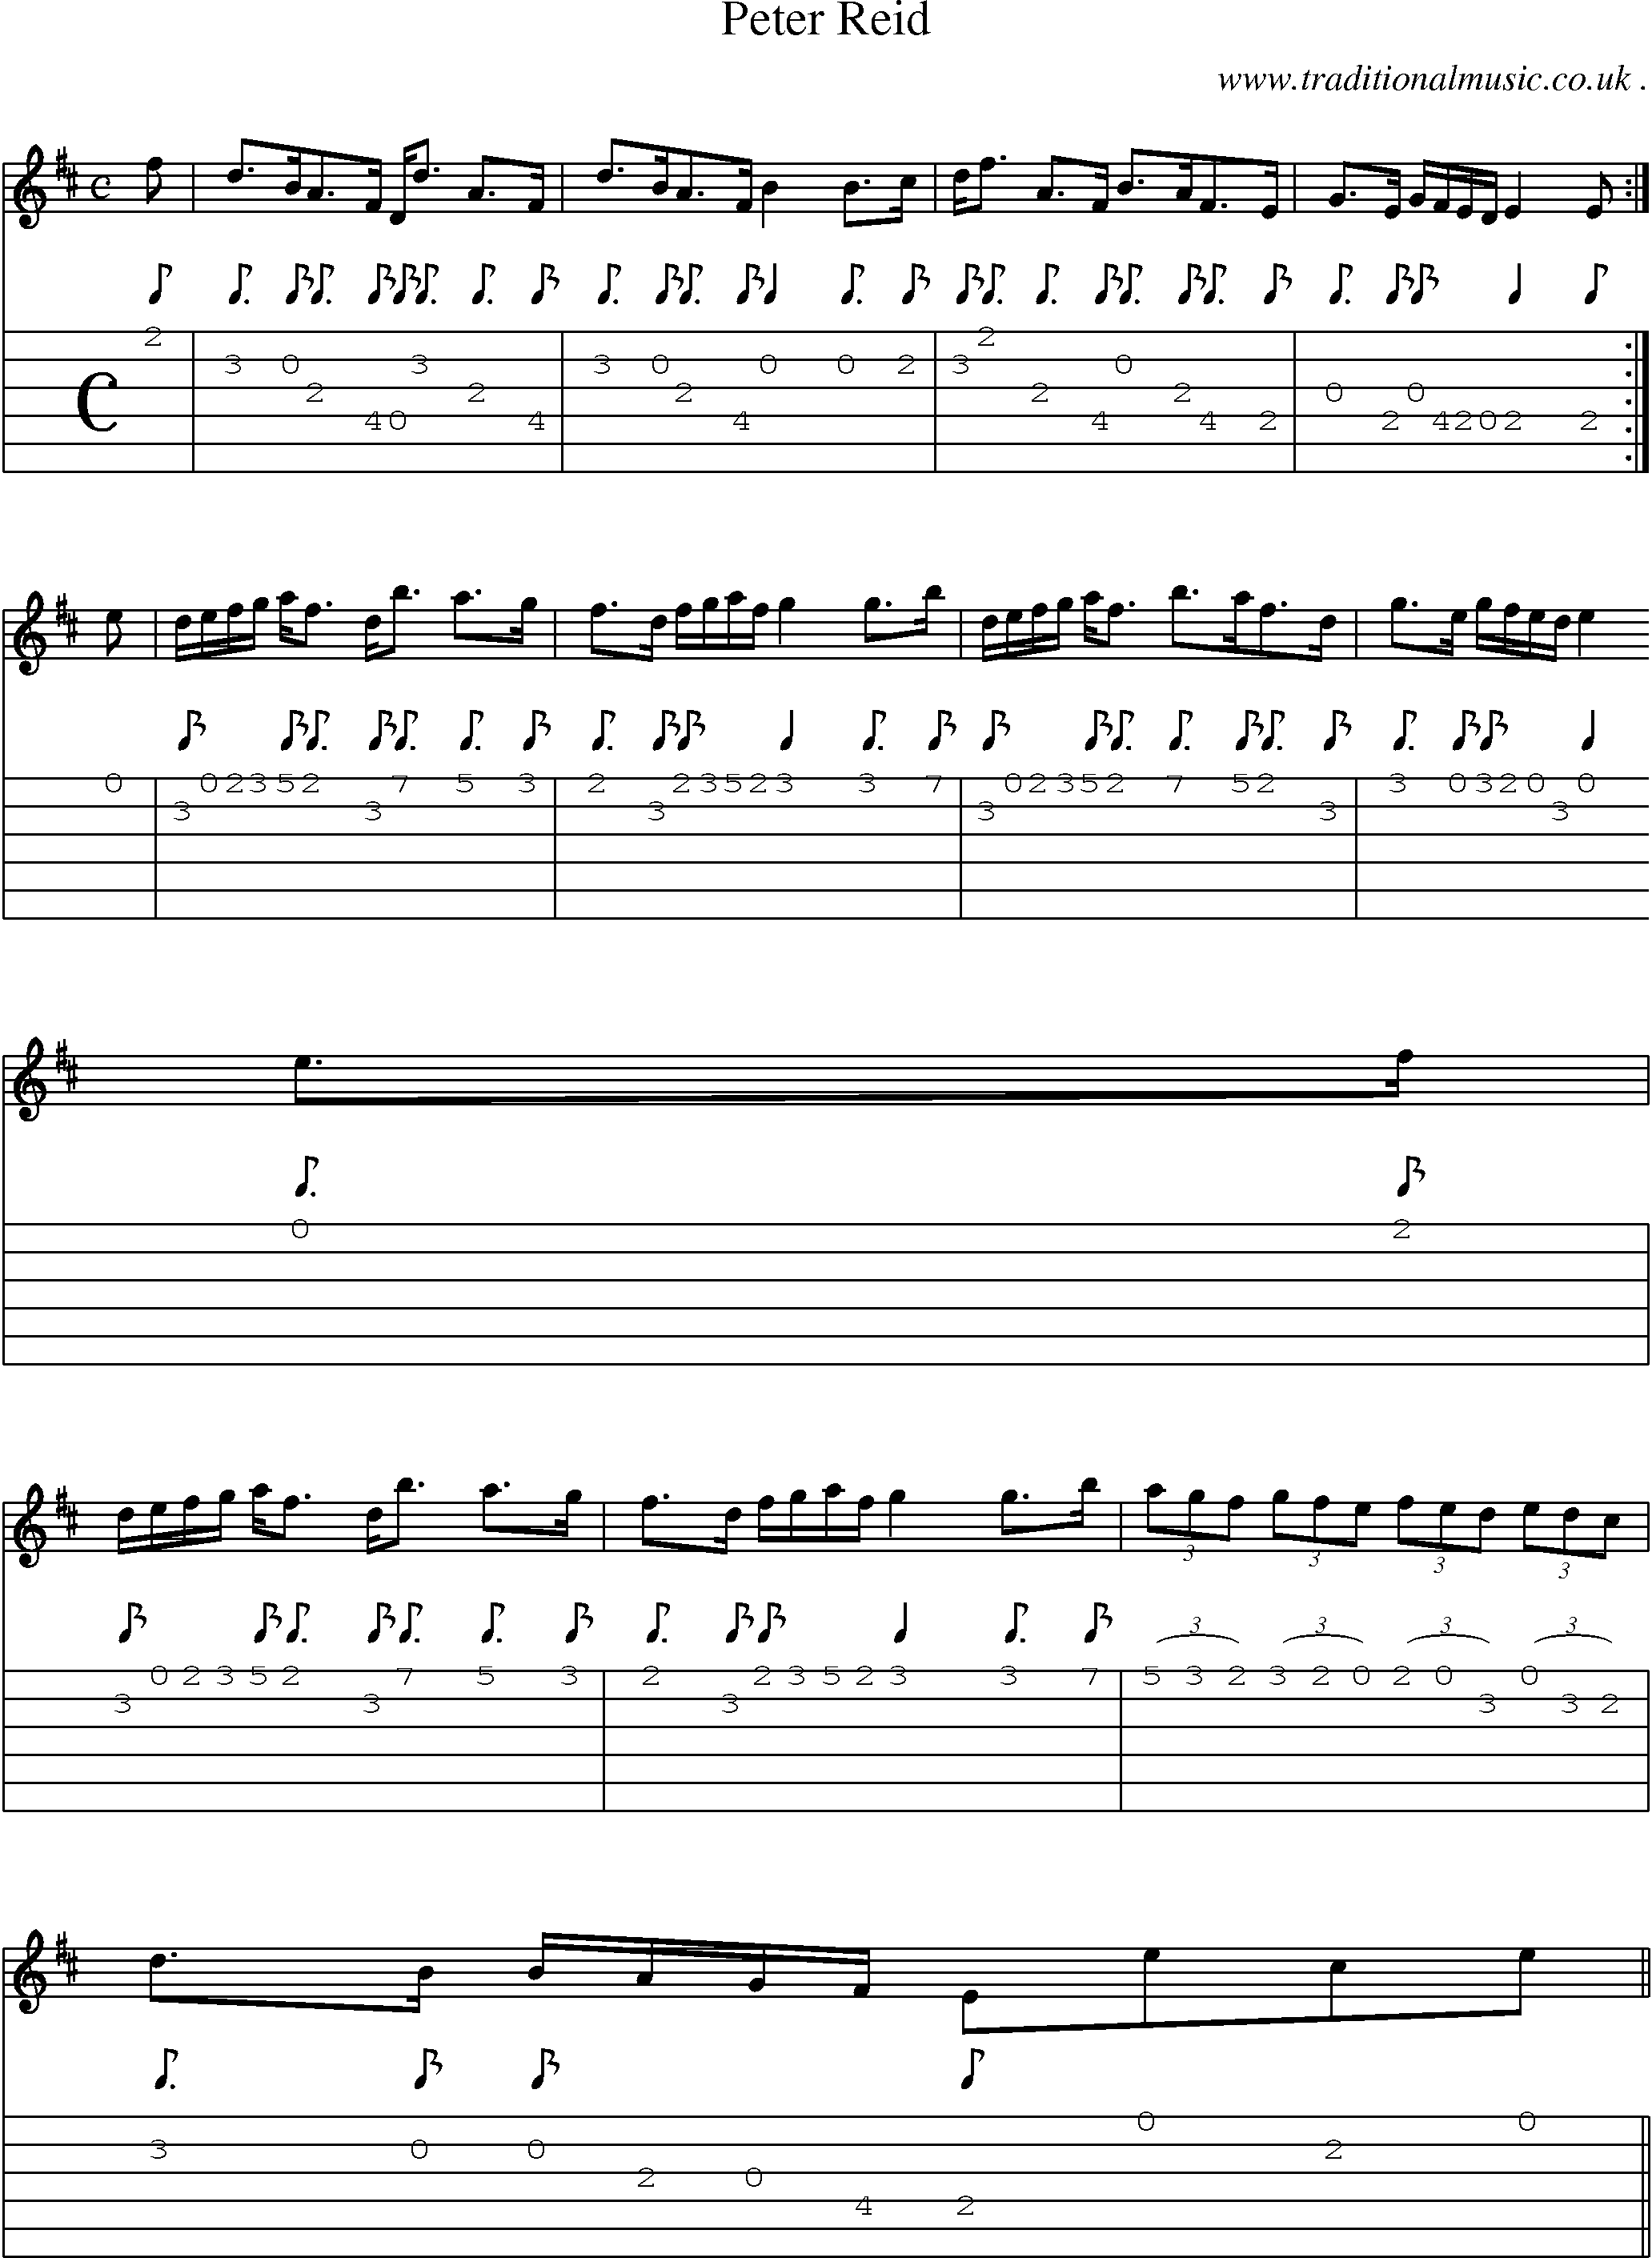 Sheet-music  score, Chords and Guitar Tabs for Peter Reid